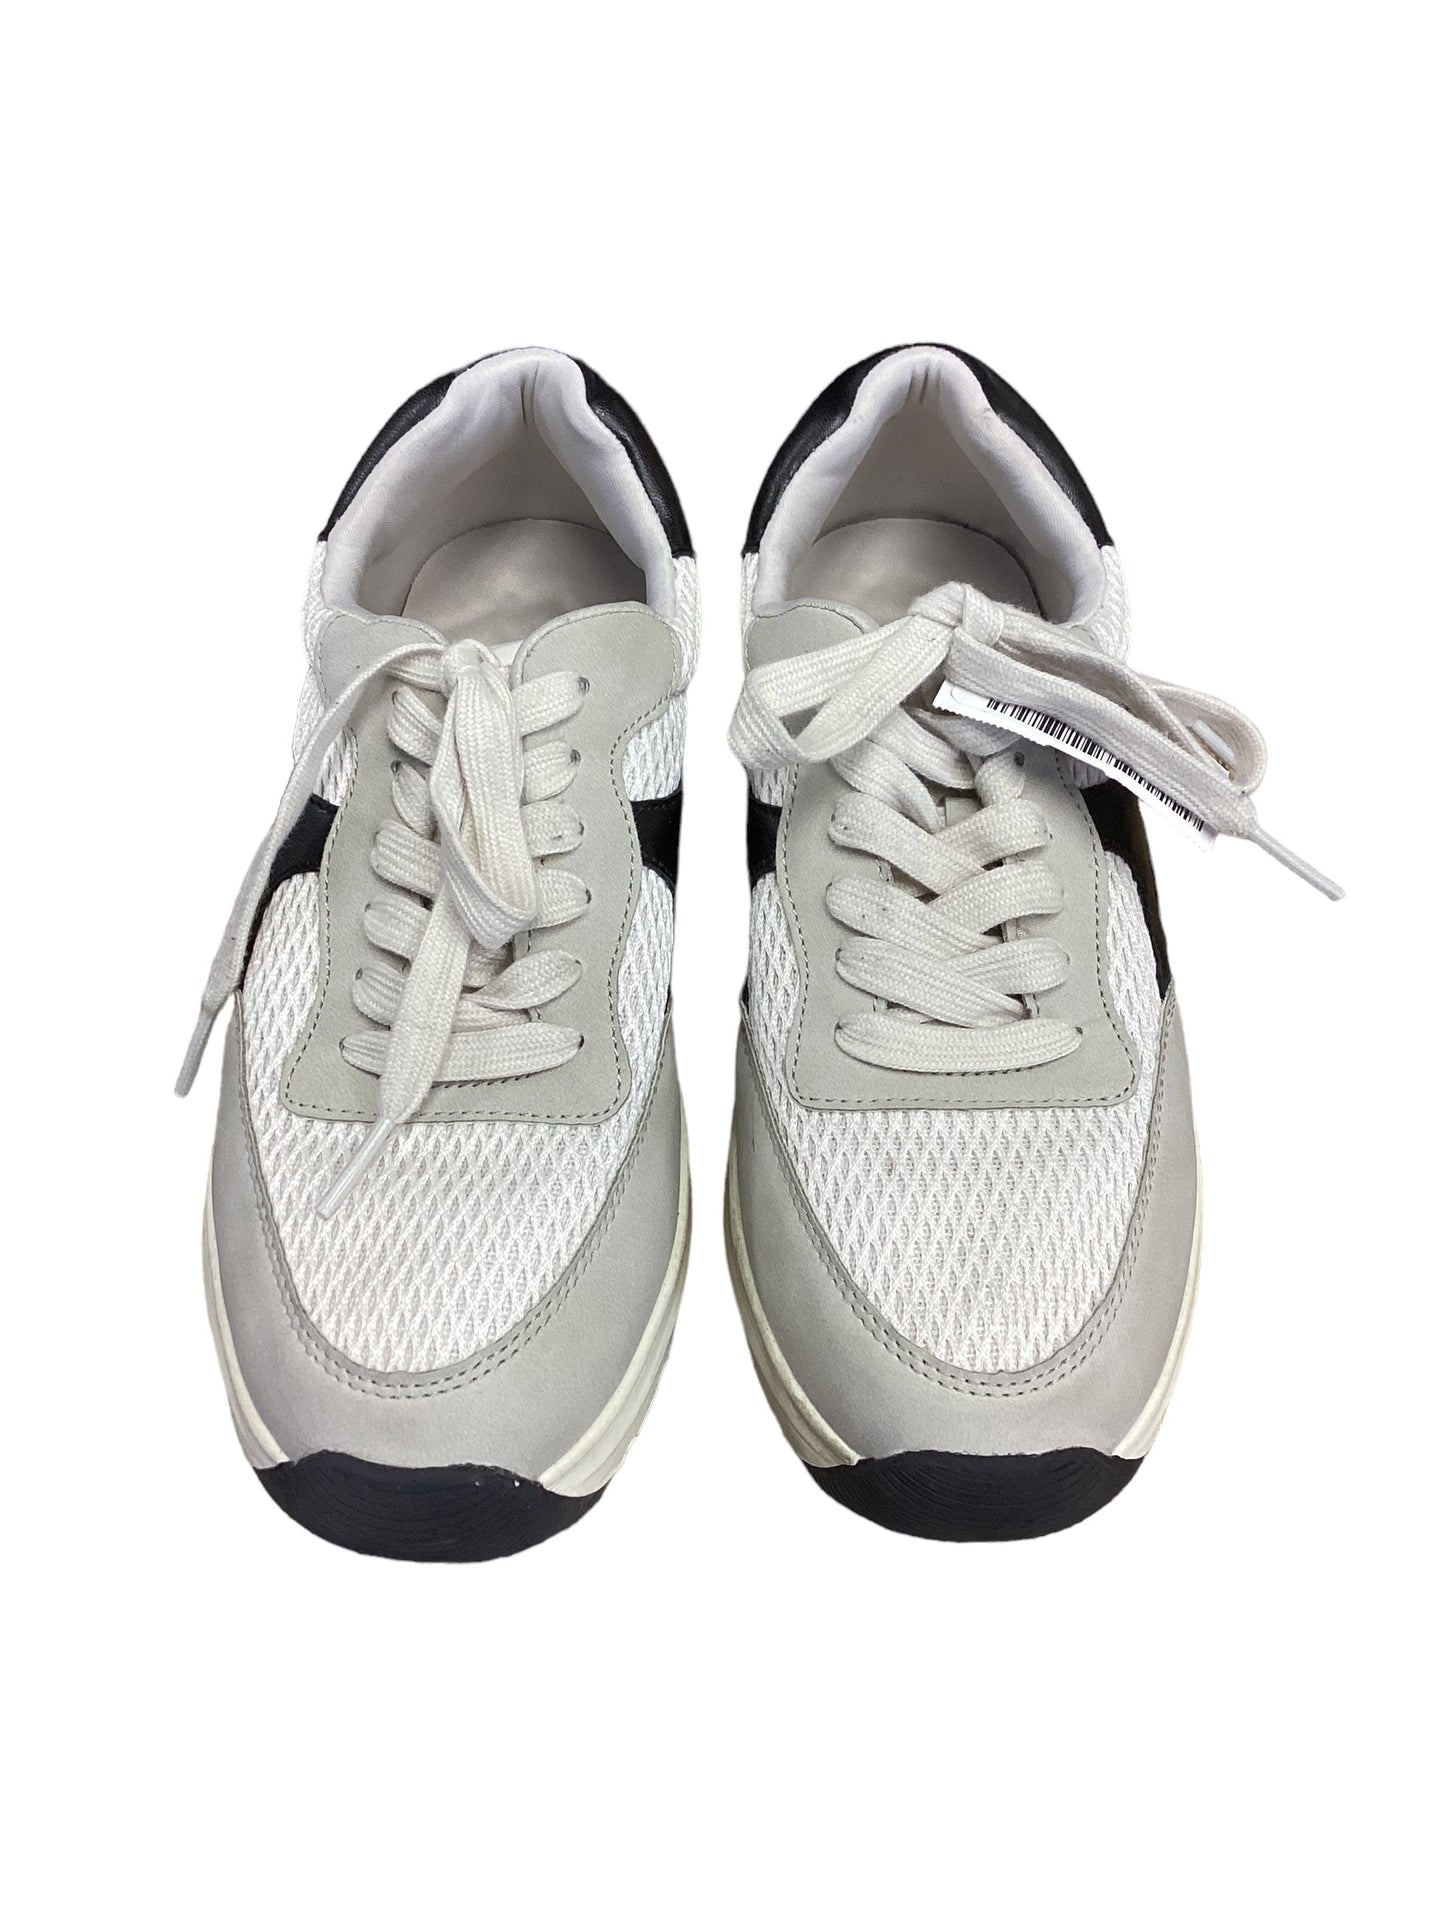 Grey & White Shoes Sneakers Time And Tru, Size 8